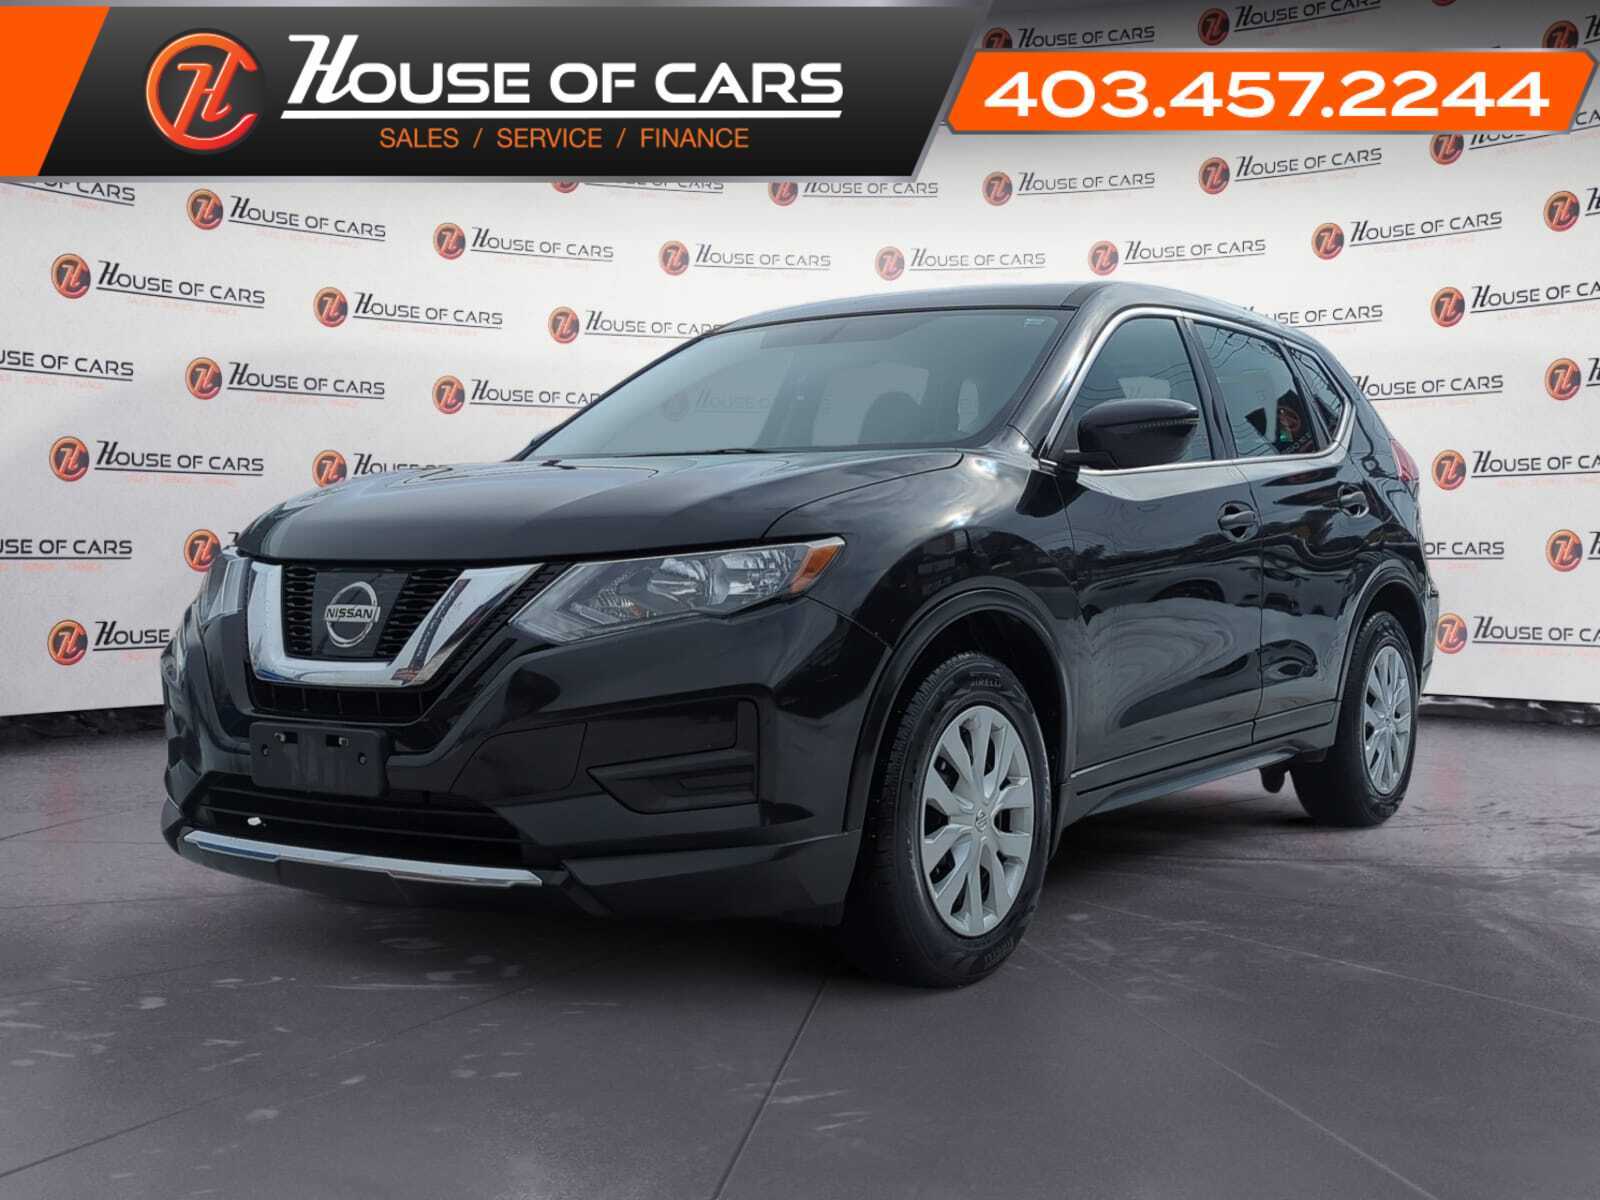 2017 Nissan Rogue FWD 4dr S Backup Camera Heated Seats Bluetooth 